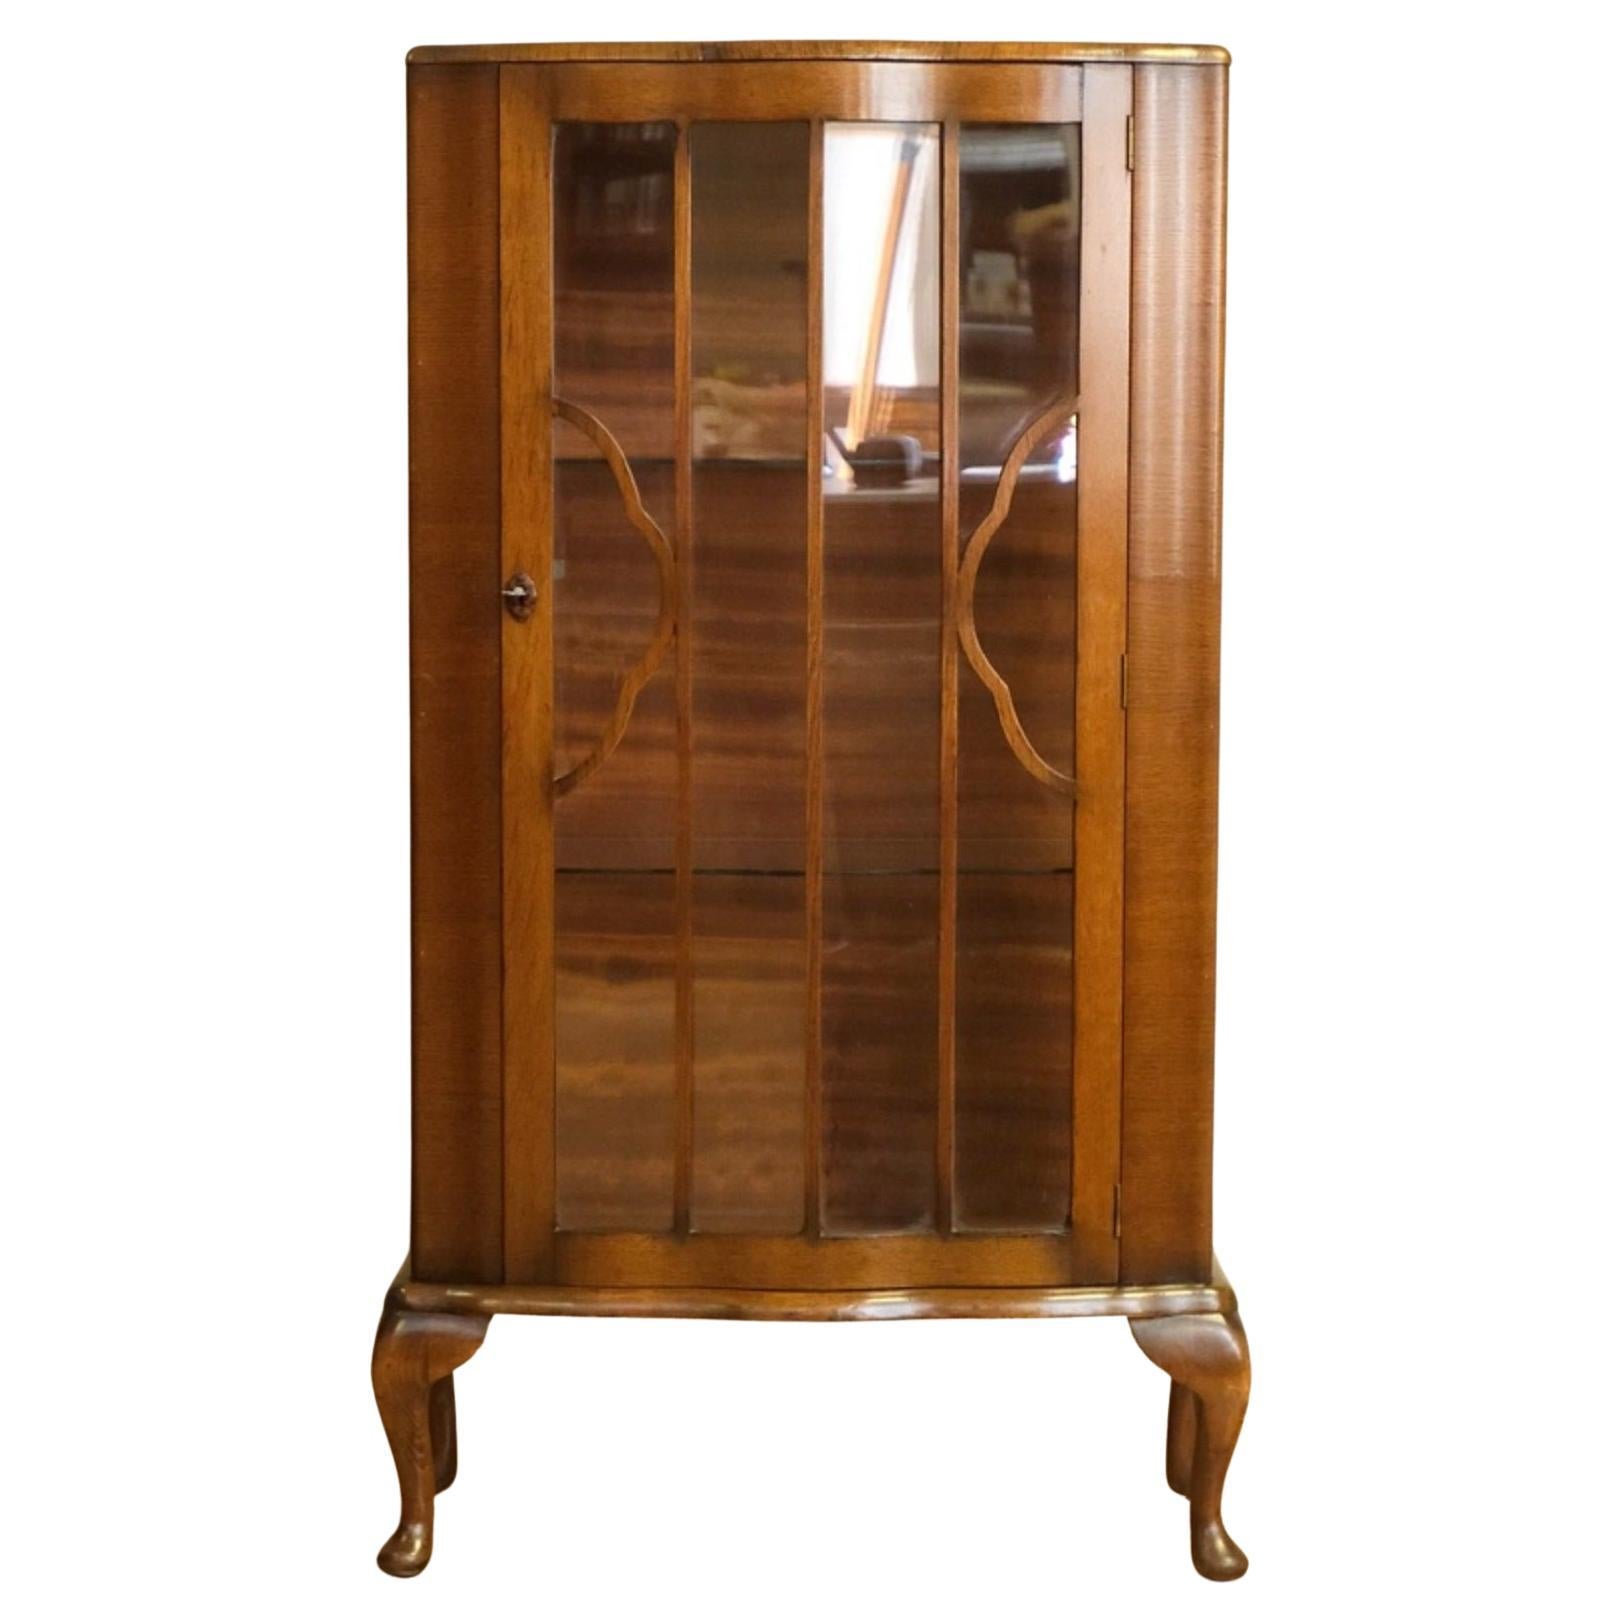 SMALL GORGEOUS WALNUT GLAZED BOOKCASE WiTH GLASS SHELVES ON QUEEN ANN Style LEGS im Angebot